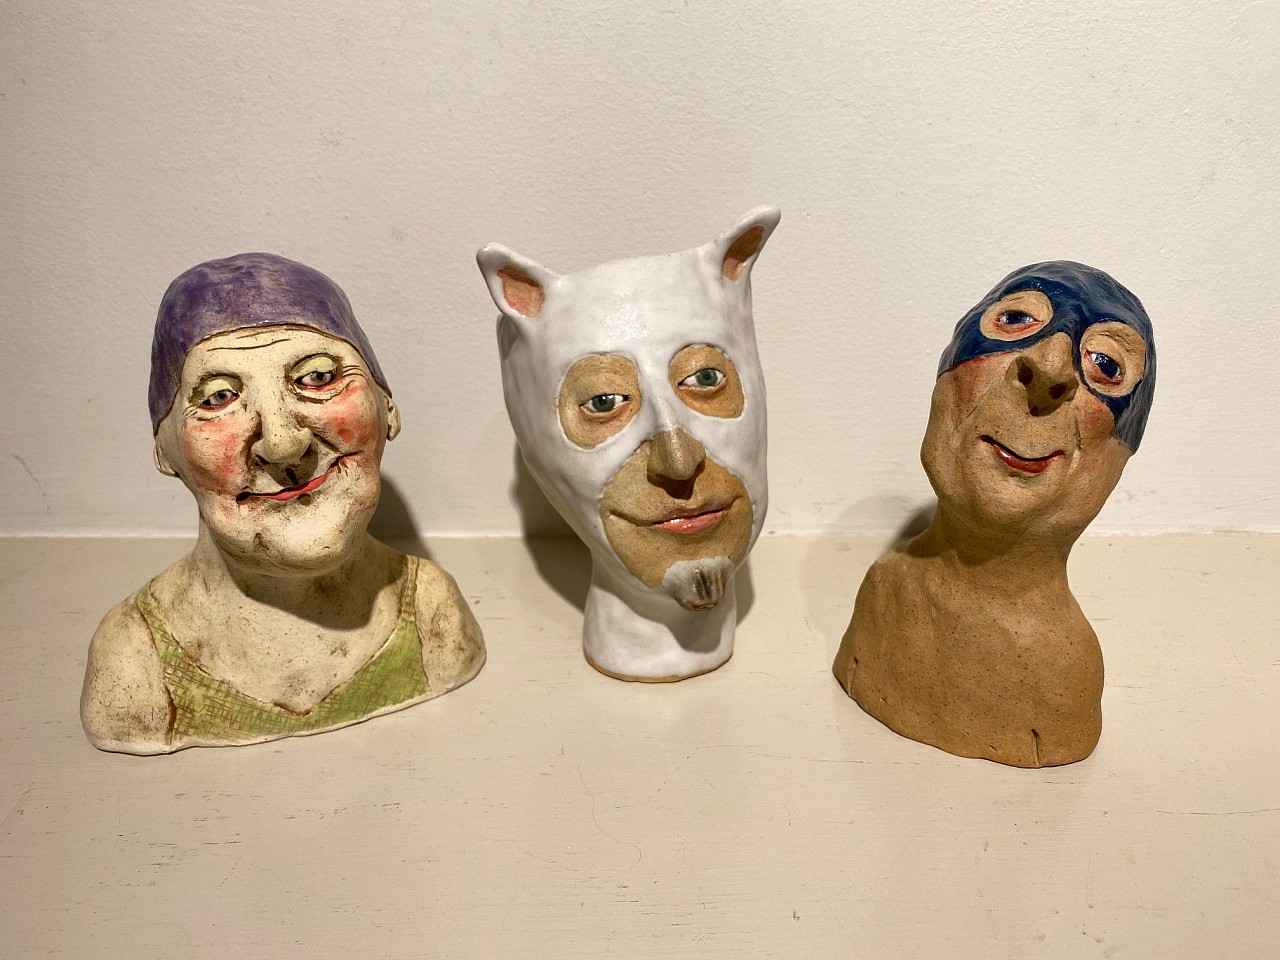 Jeanine Pennell, Characters Group 6
glazed ceramic, 6"" - 8""
JCAC 6292.06
$225